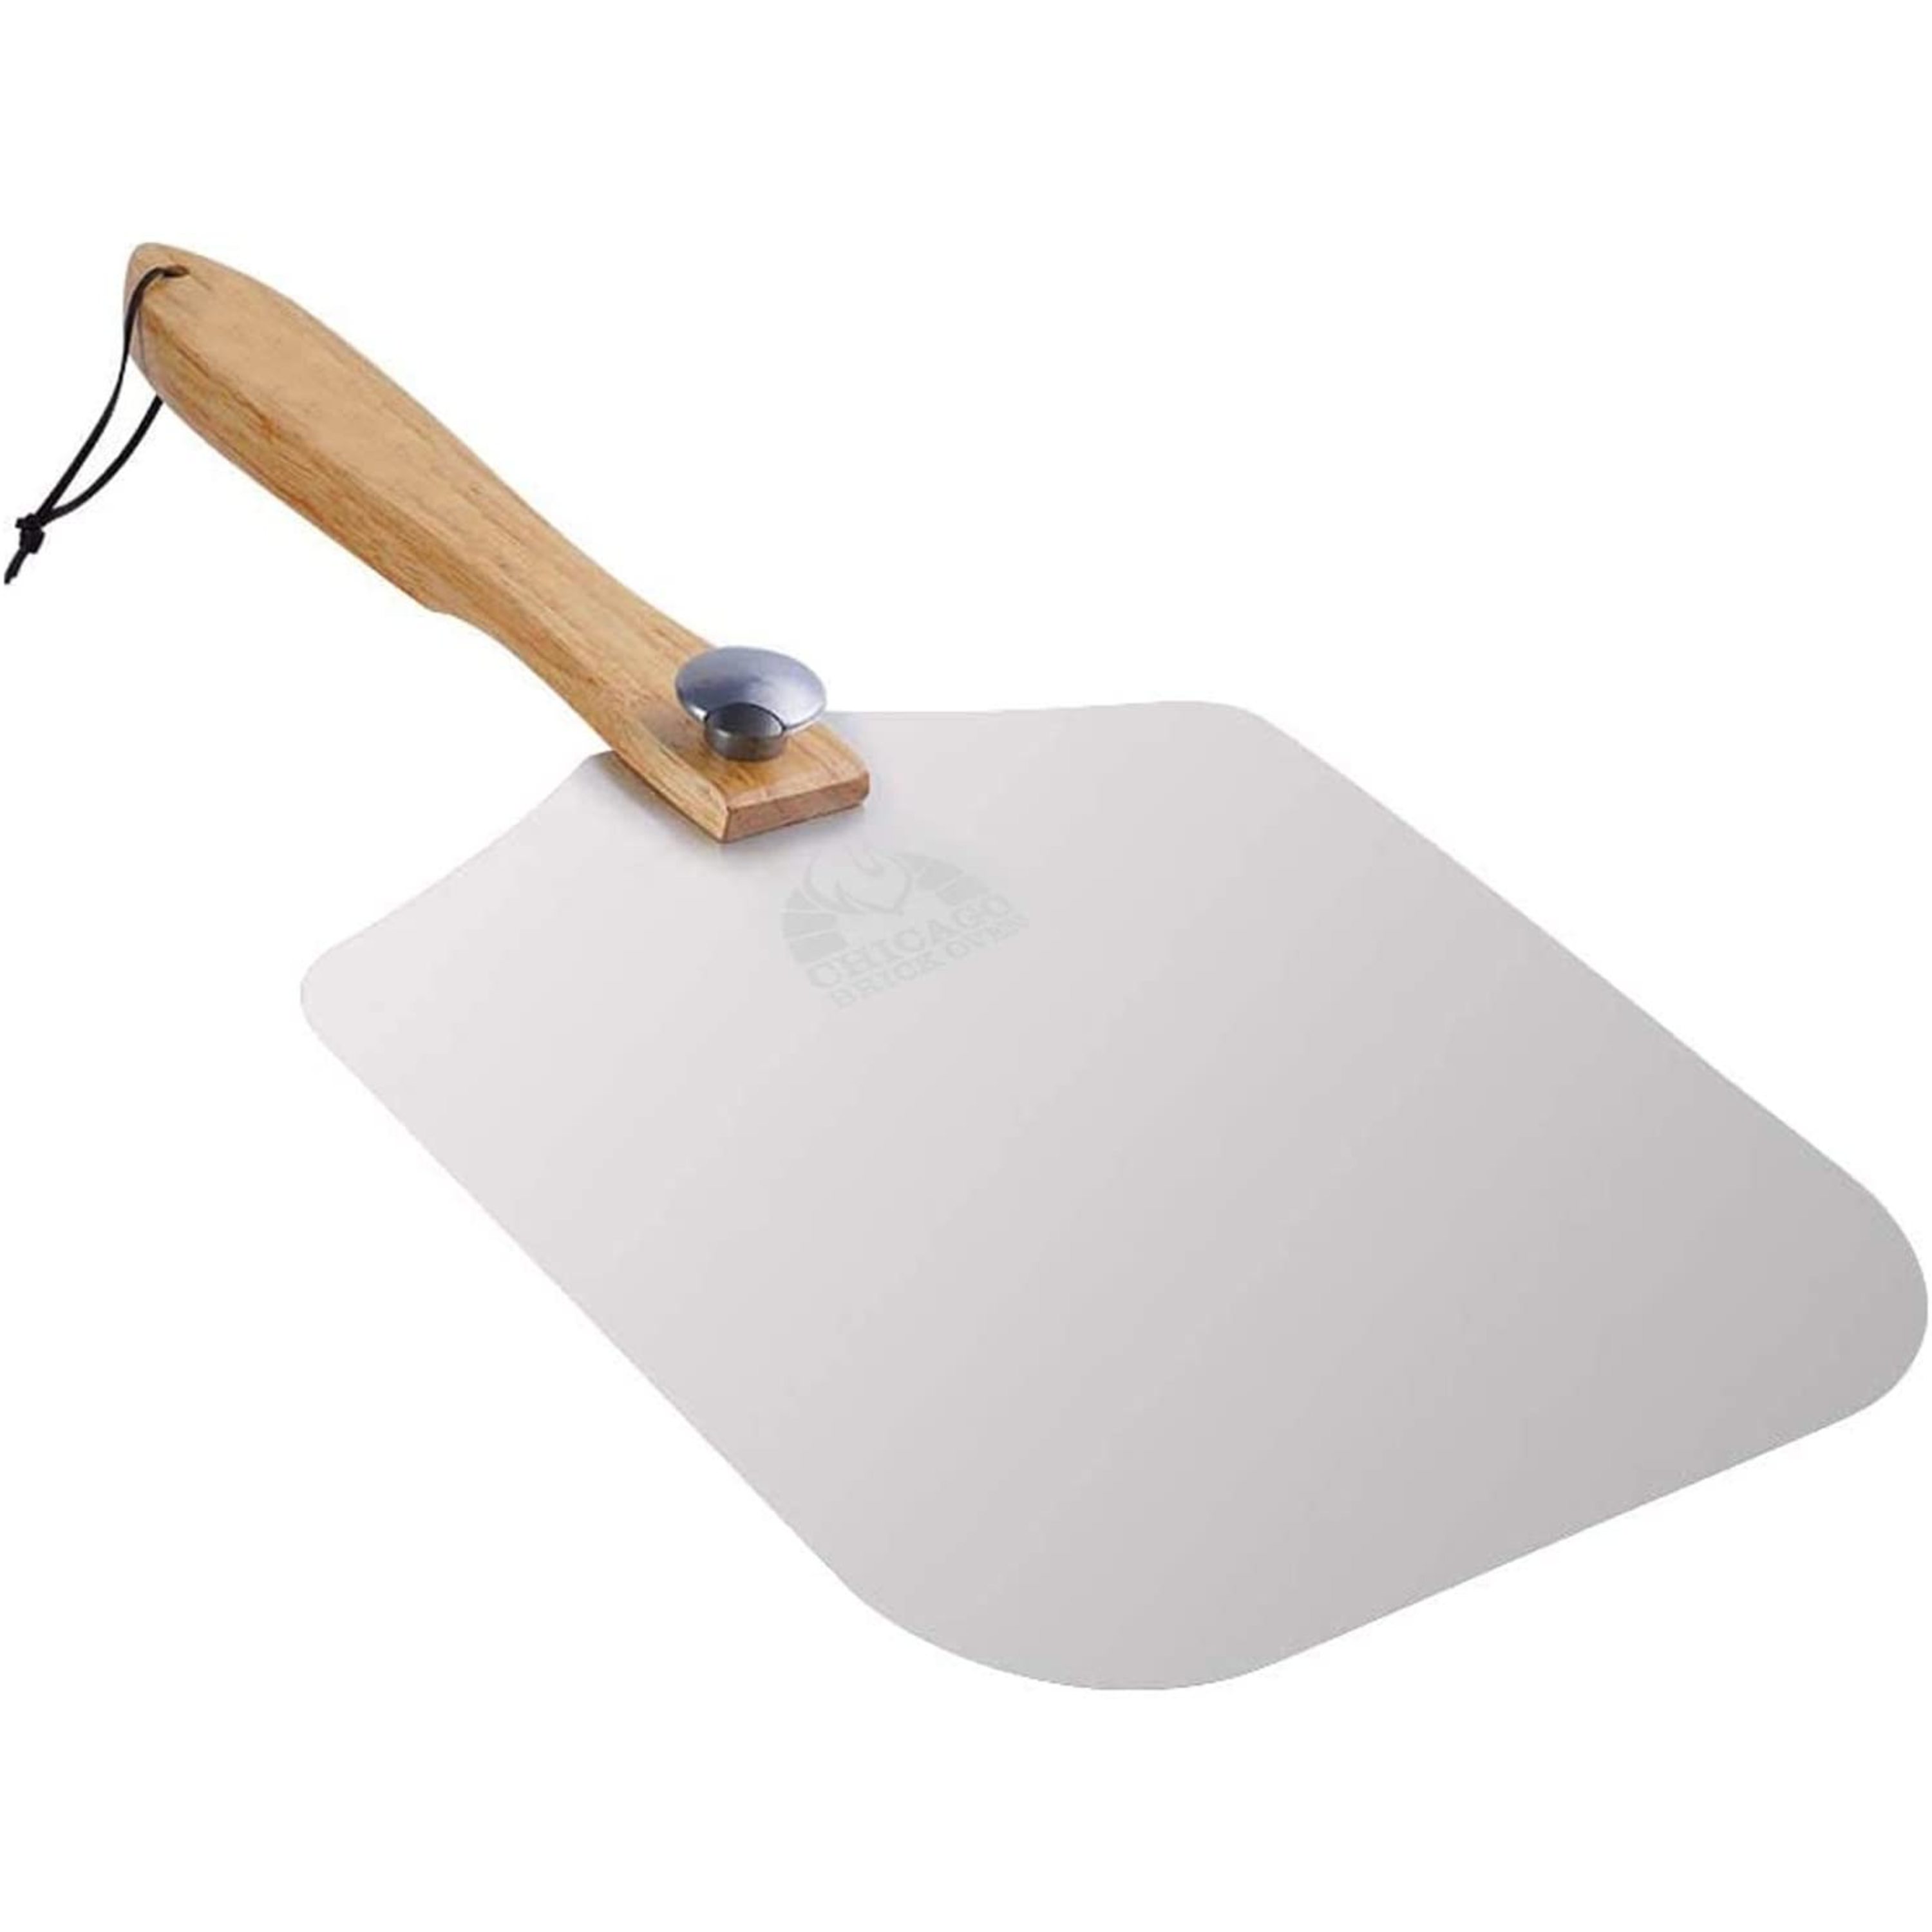 Chicago Brick Oven Aluminum Pizza Peel 12" x 14" with Foldable Wooden Handle, 25" Long Turning Spatula - image 1 of 5